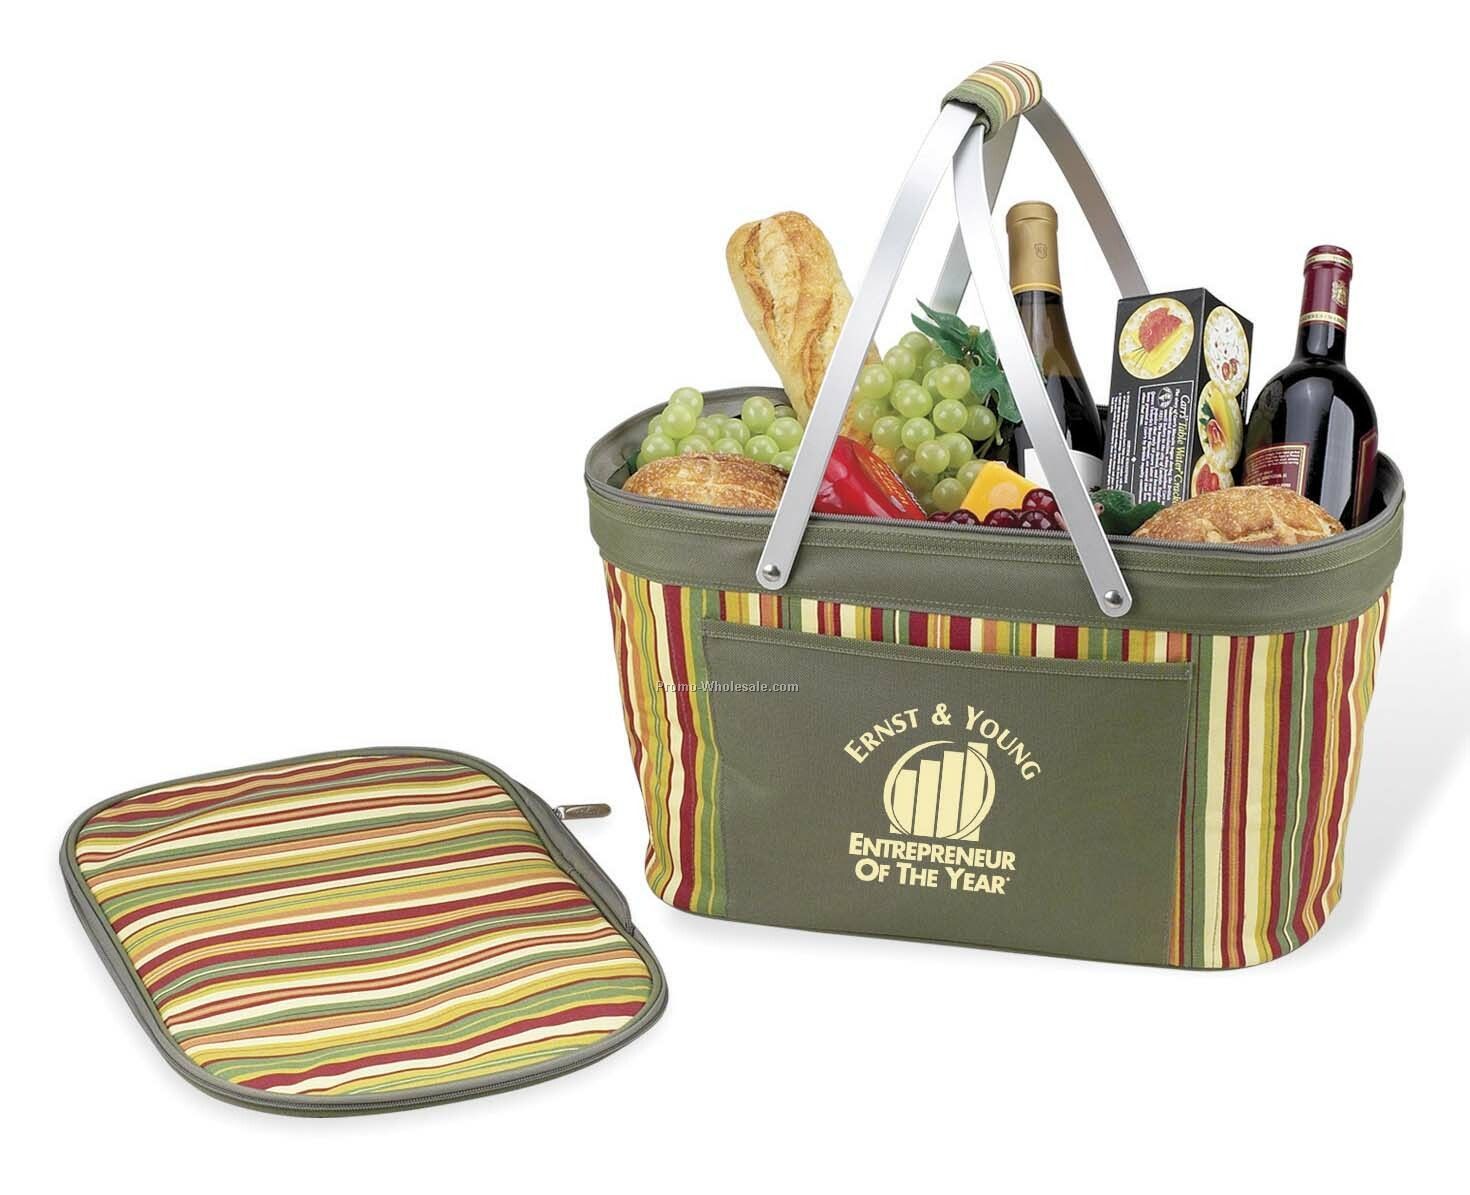 10.5"x18.5"x11.5" Collapsible Insulated Basket